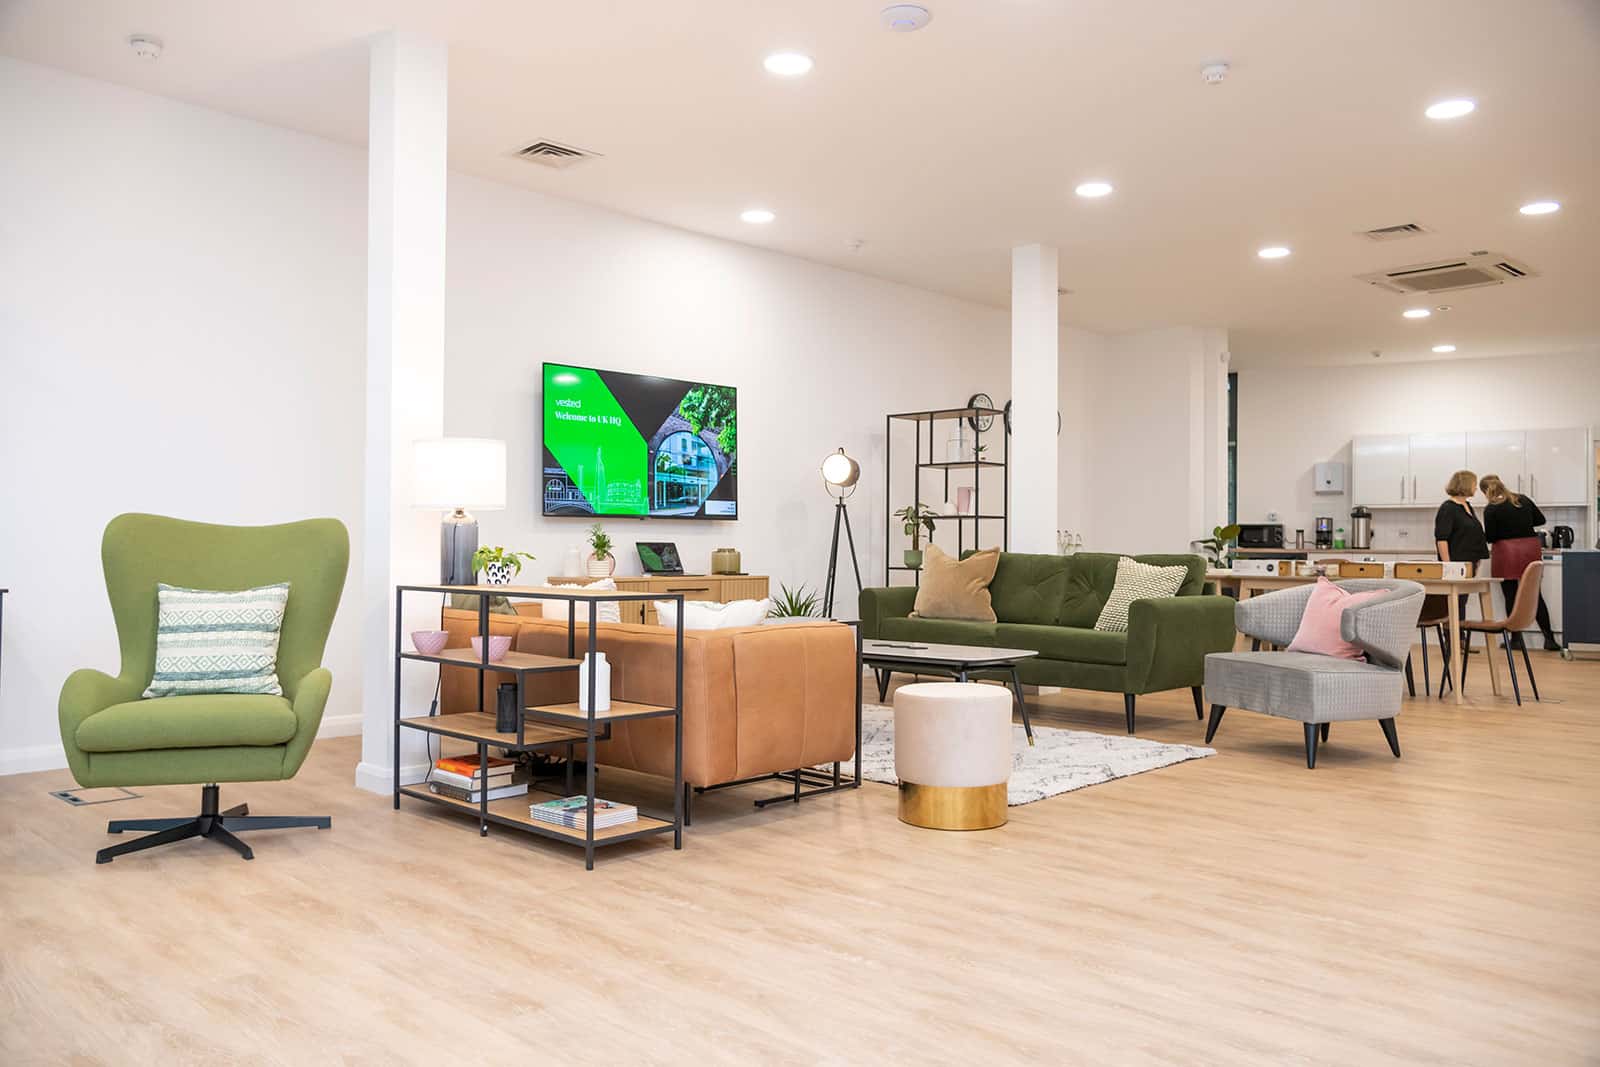 Interior of the London headquarters of Vested, with casual furniture in shades of green, tan, and grey.